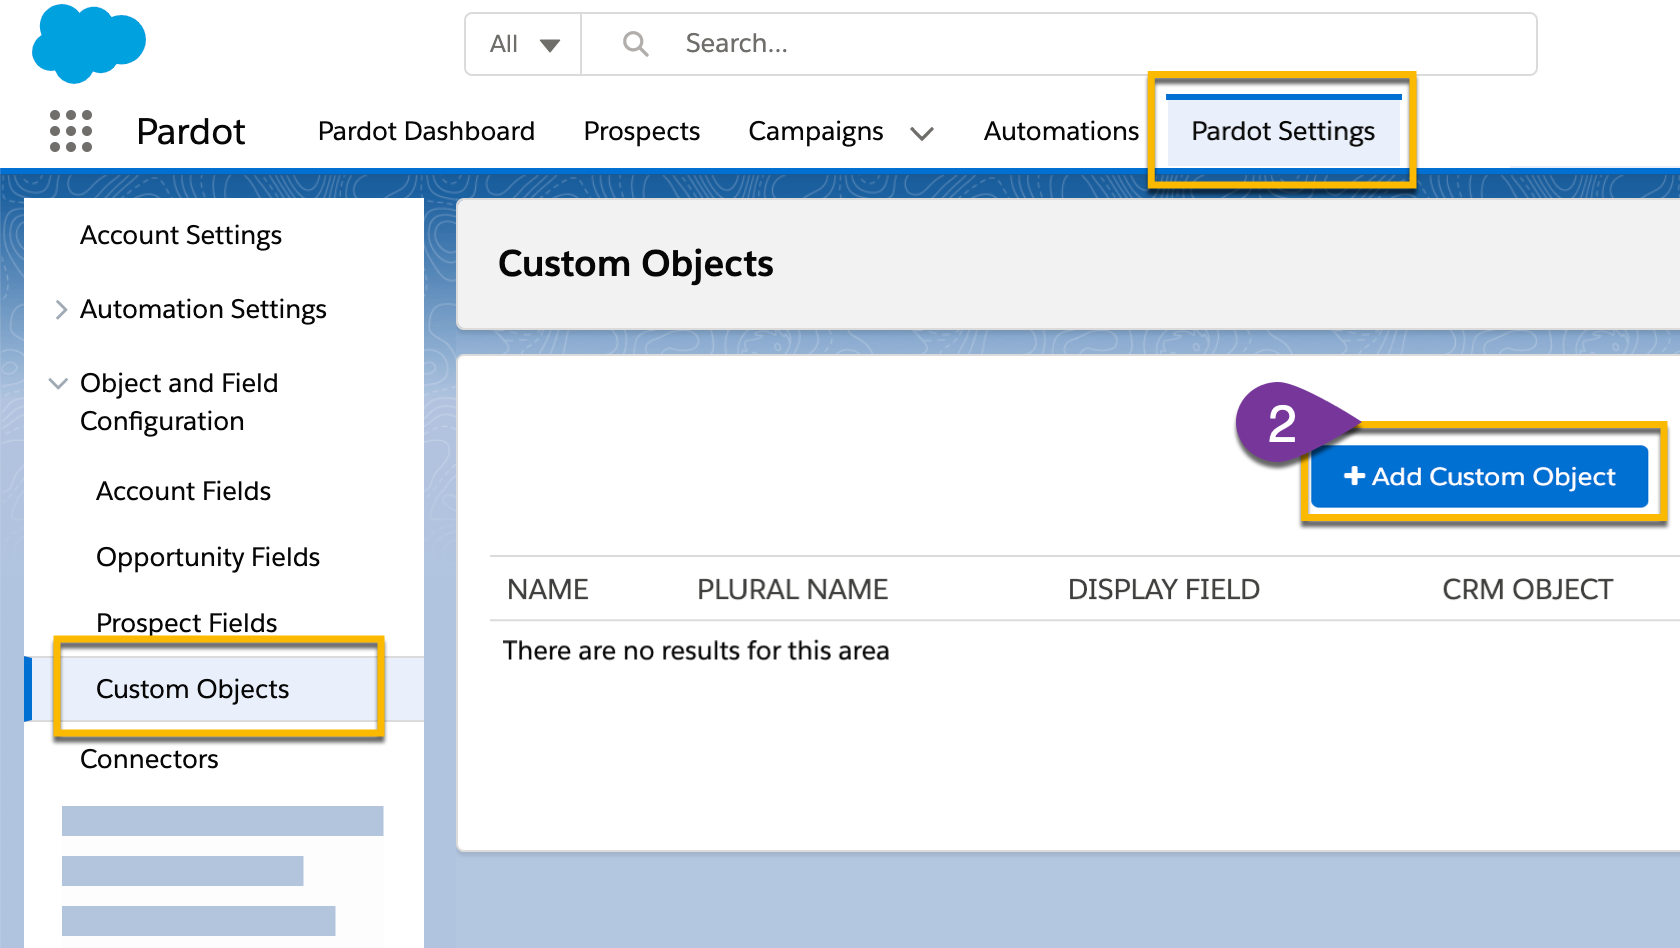 In the settings for the Pardot Lightning App, adding a new Custom Object